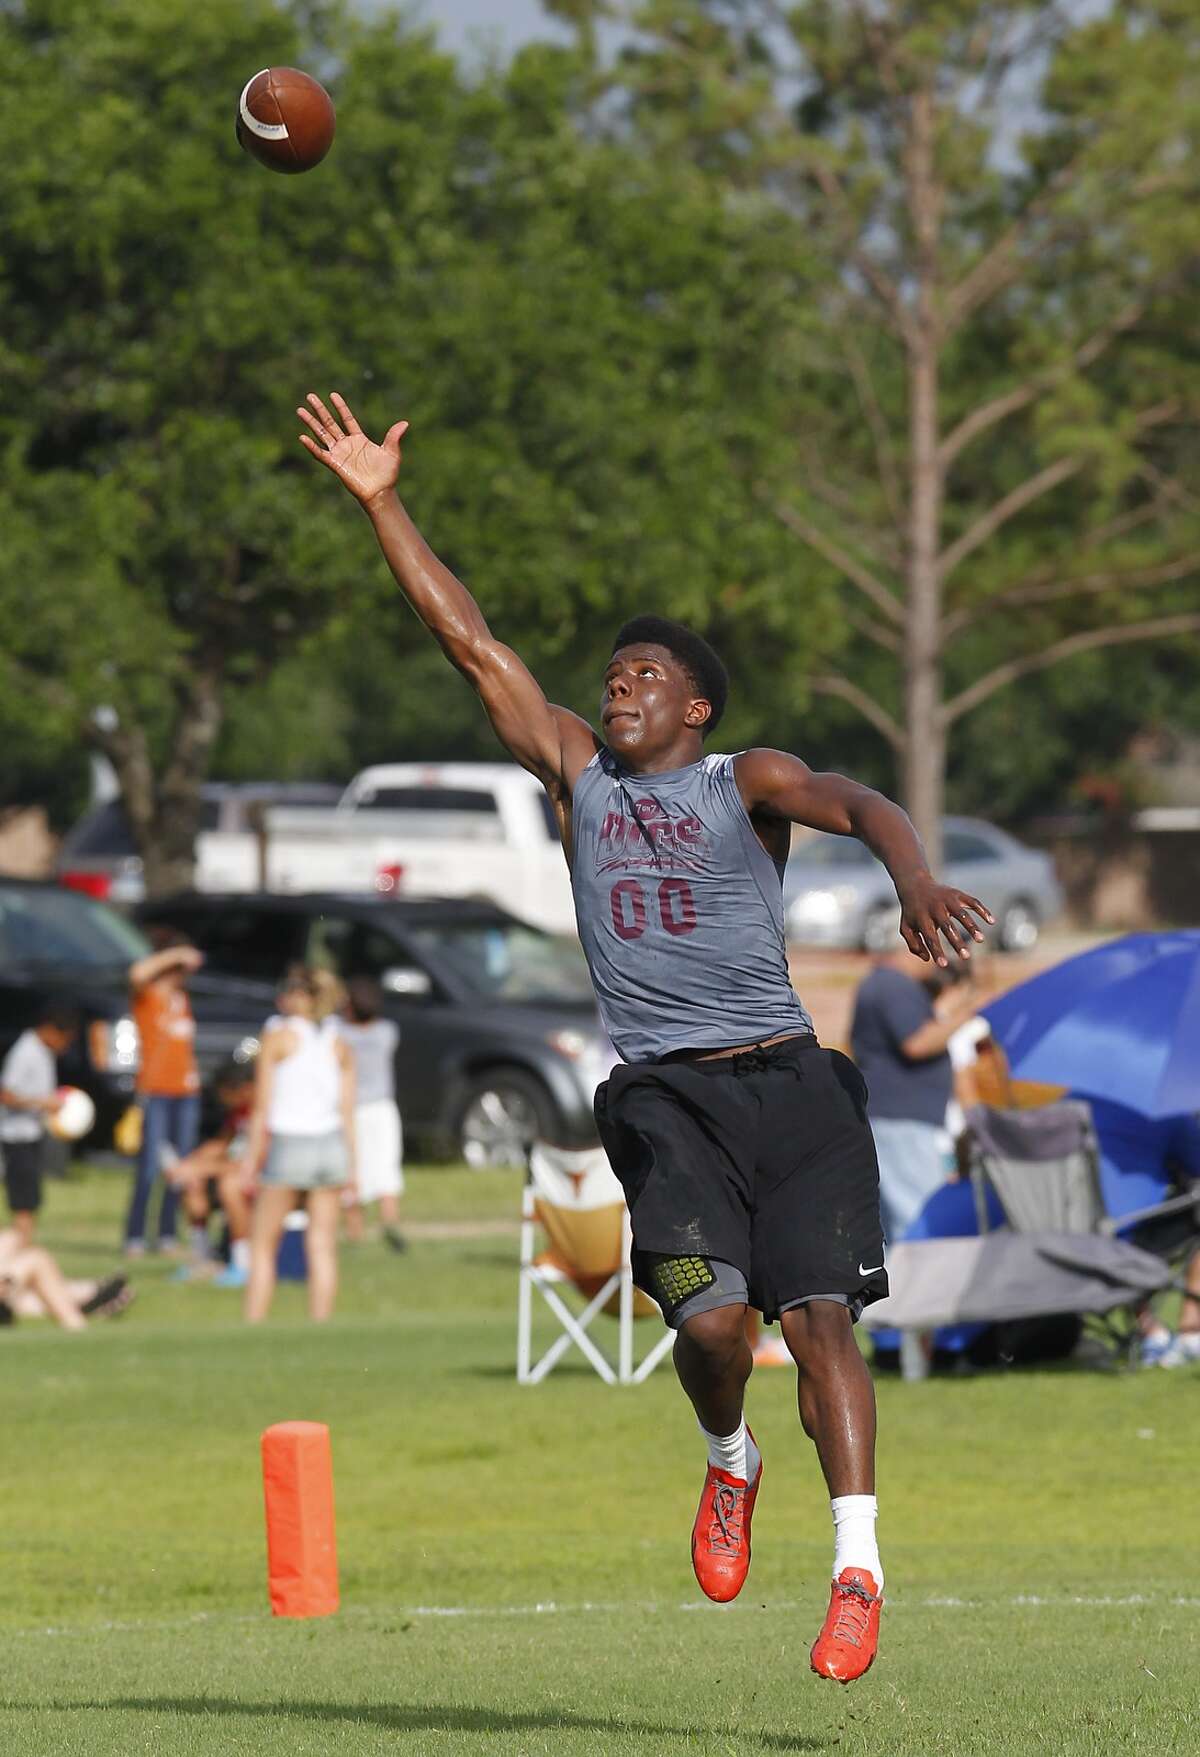 Fred Cooper of Reagan attempts a difficult catch in the third round of the Cinco Ranch Adrenaline 7-on-7 Tournament held at Cinco Ranch High School on June 27, 2014.